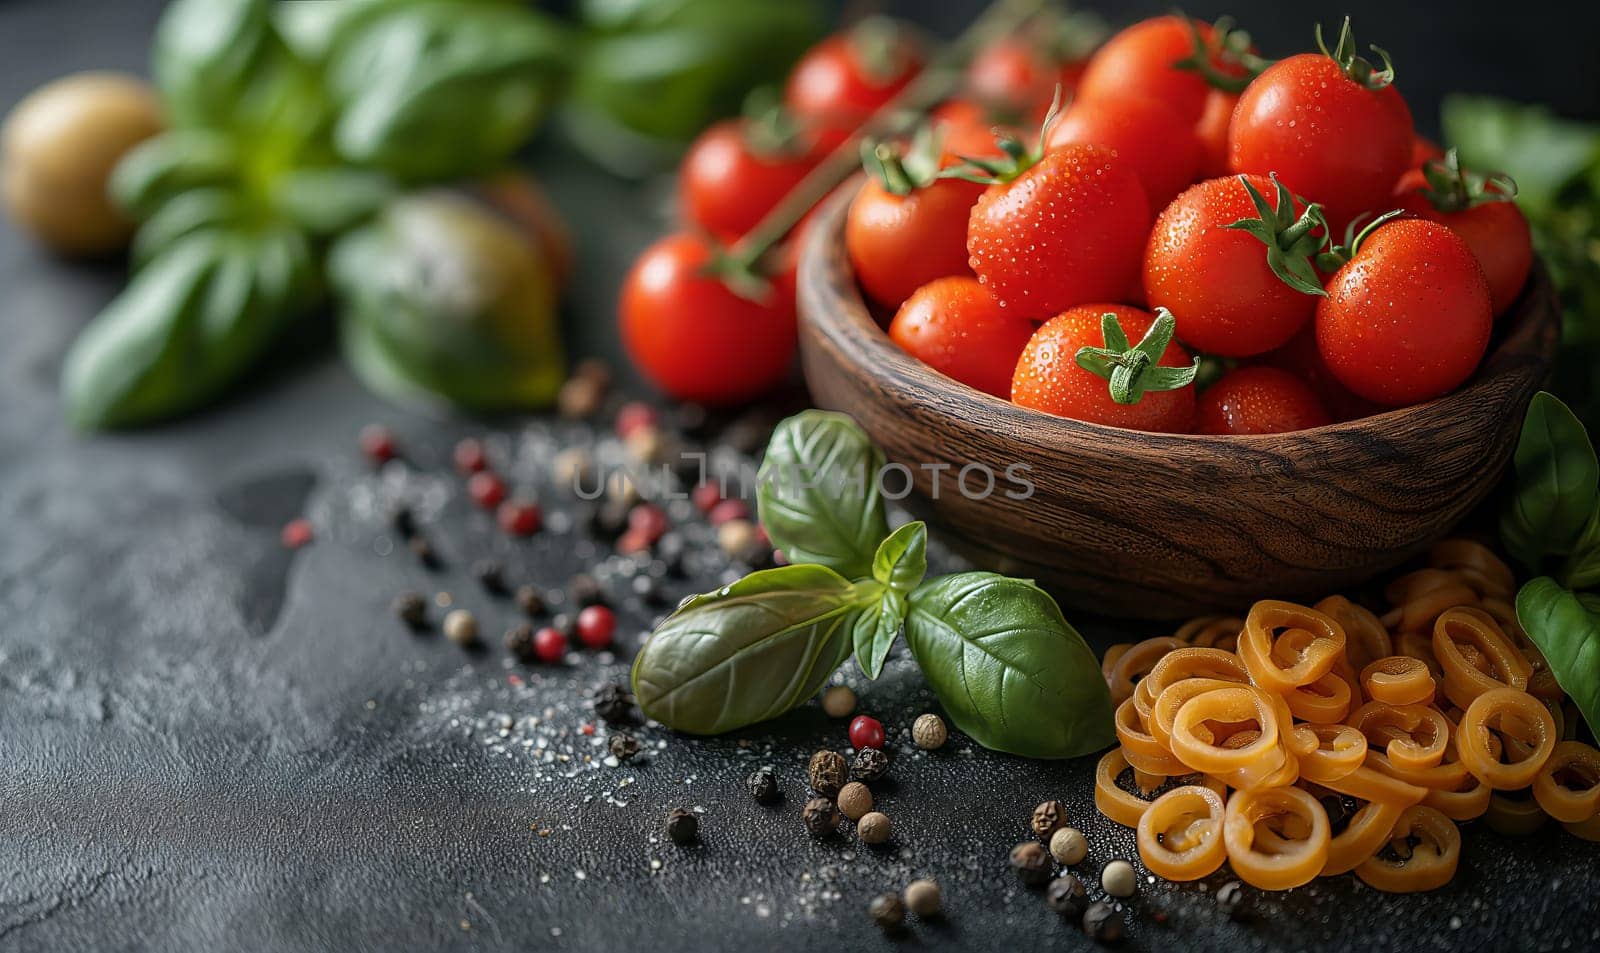 Tomatoes and basil on a dark background. by Fischeron